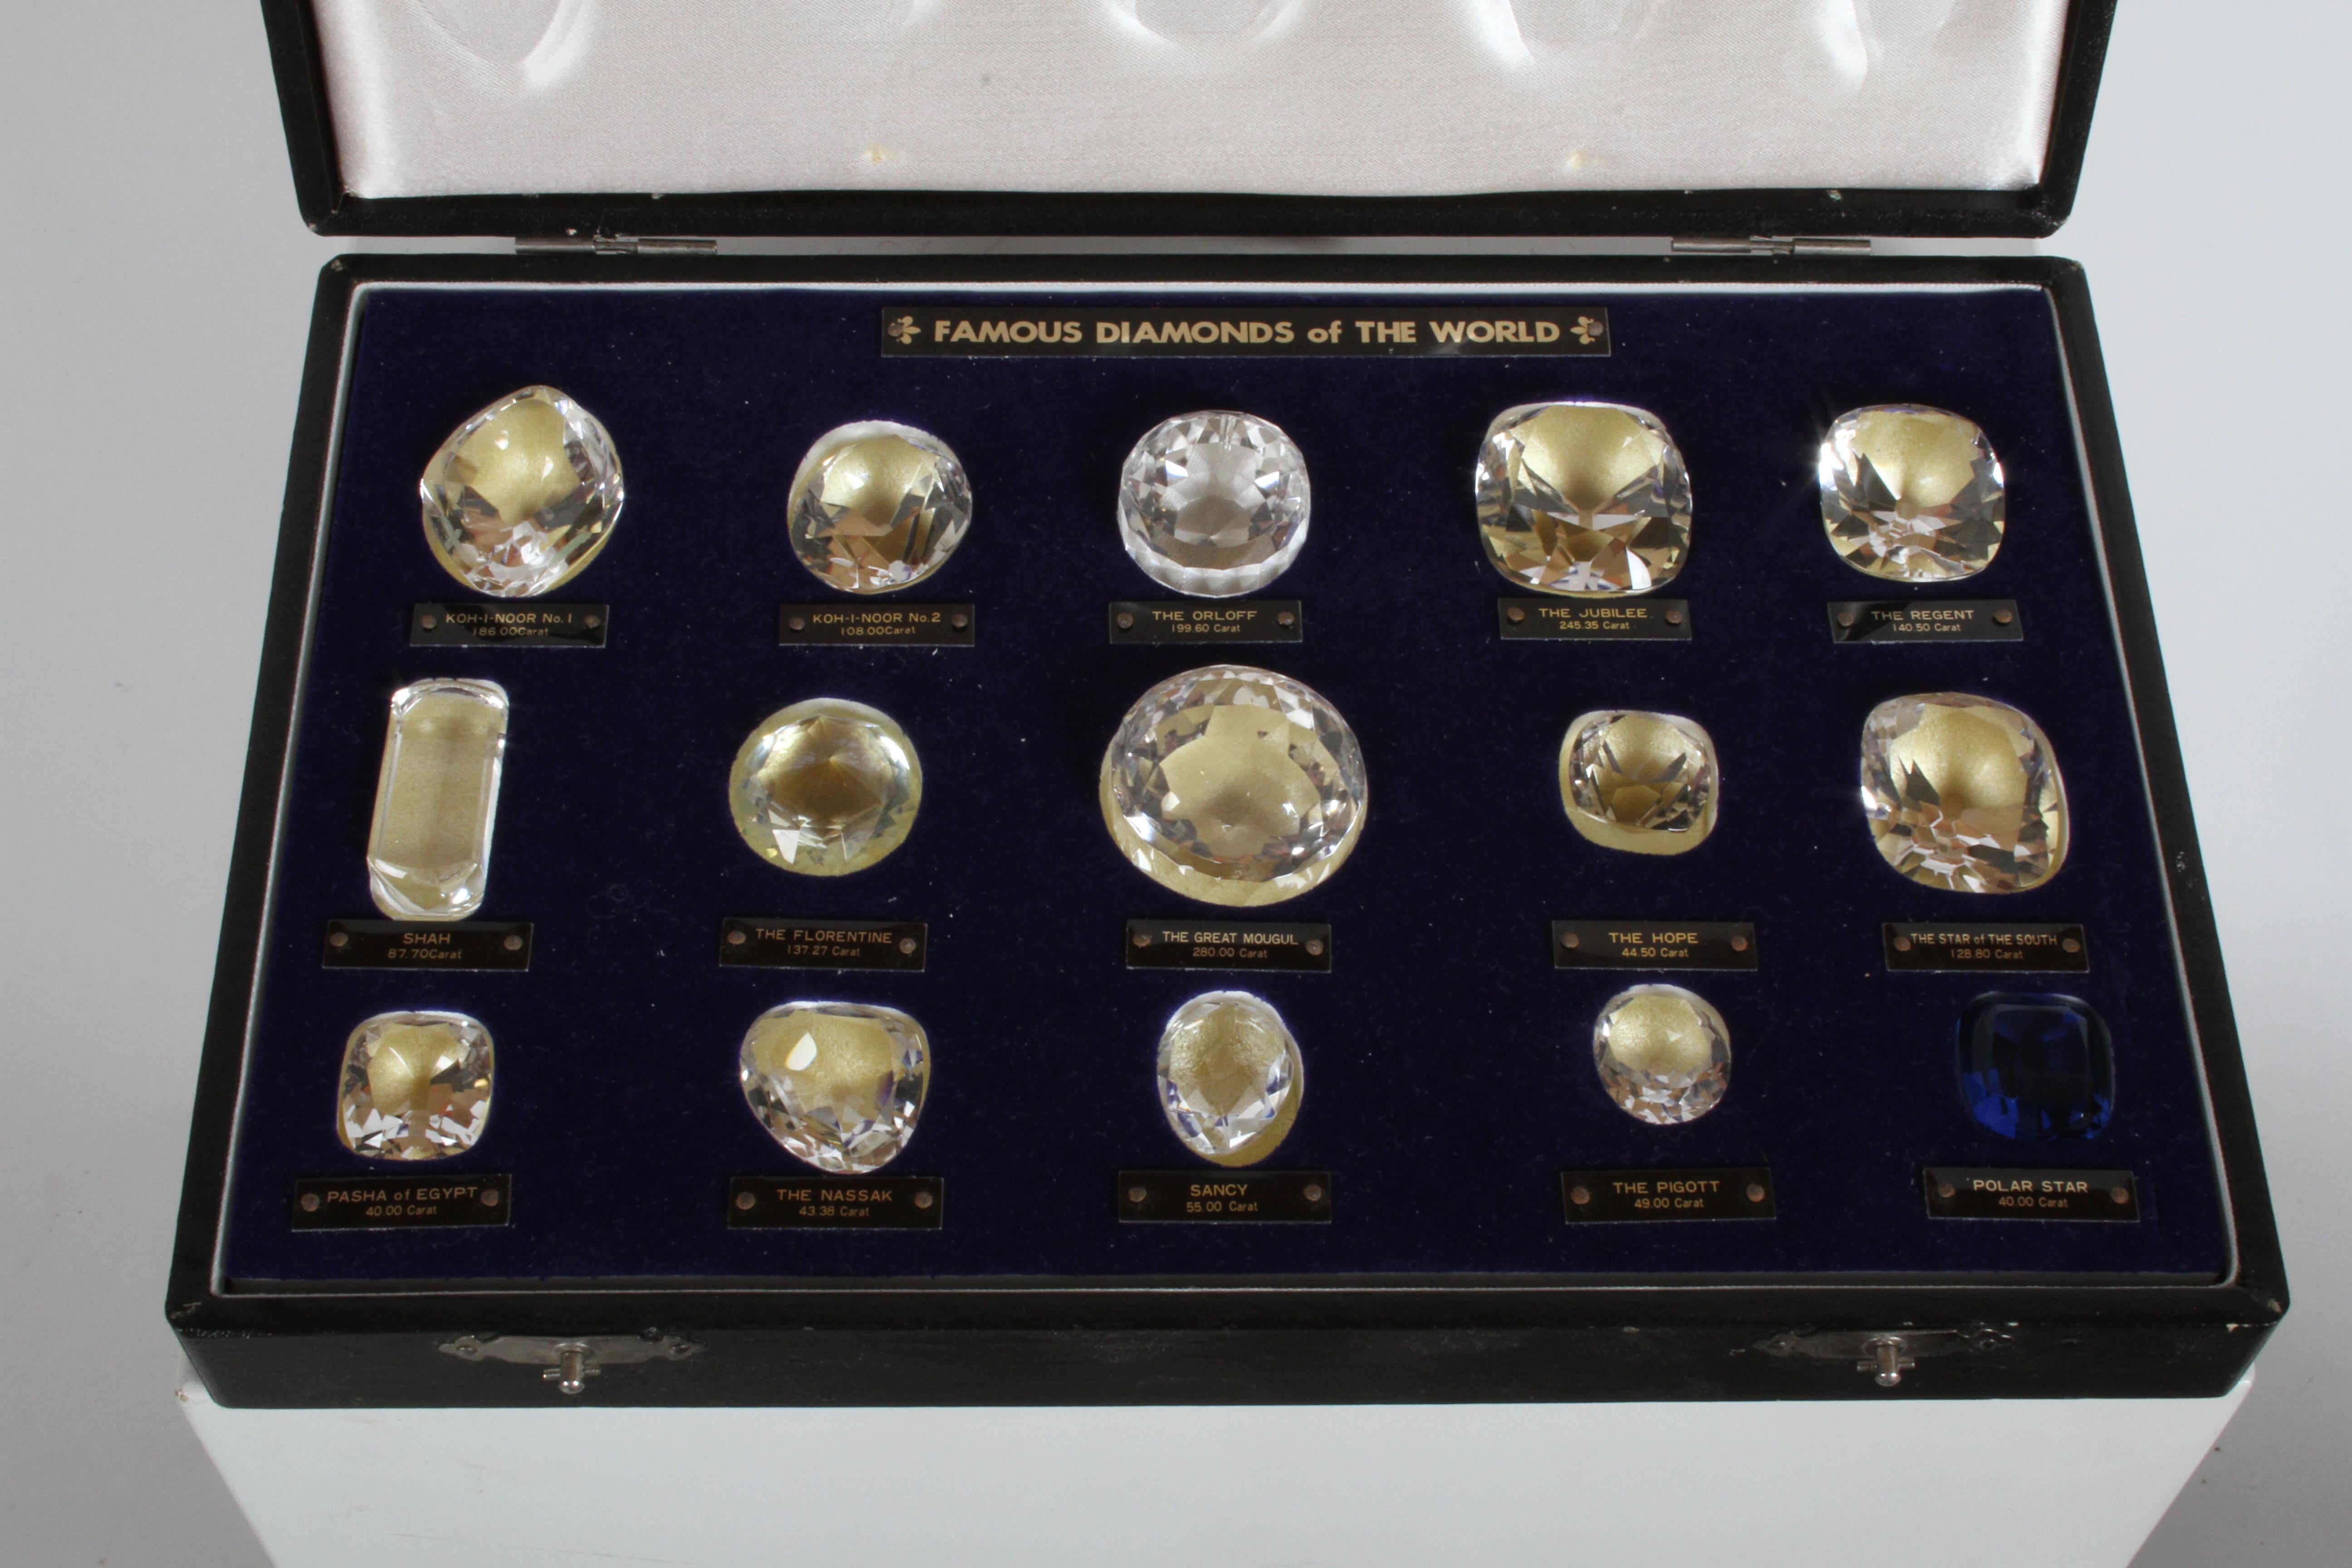 Hollywood Regency Antique Set of 15 Historical & Famous Diamonds of the World Replicas in a Case